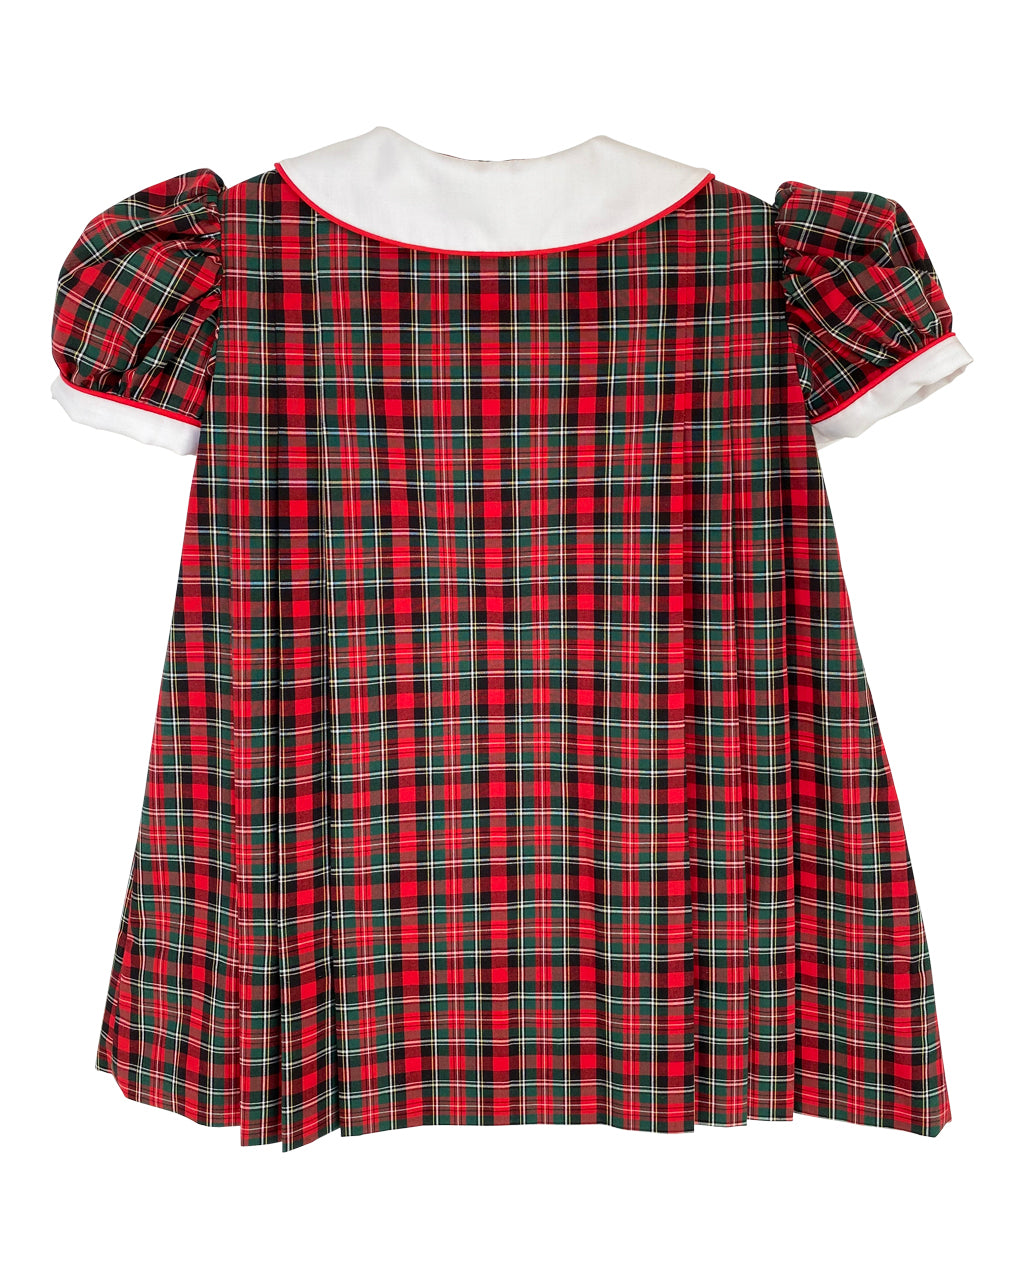 Pre-Order Cherry Dress in Red and Green Plaid